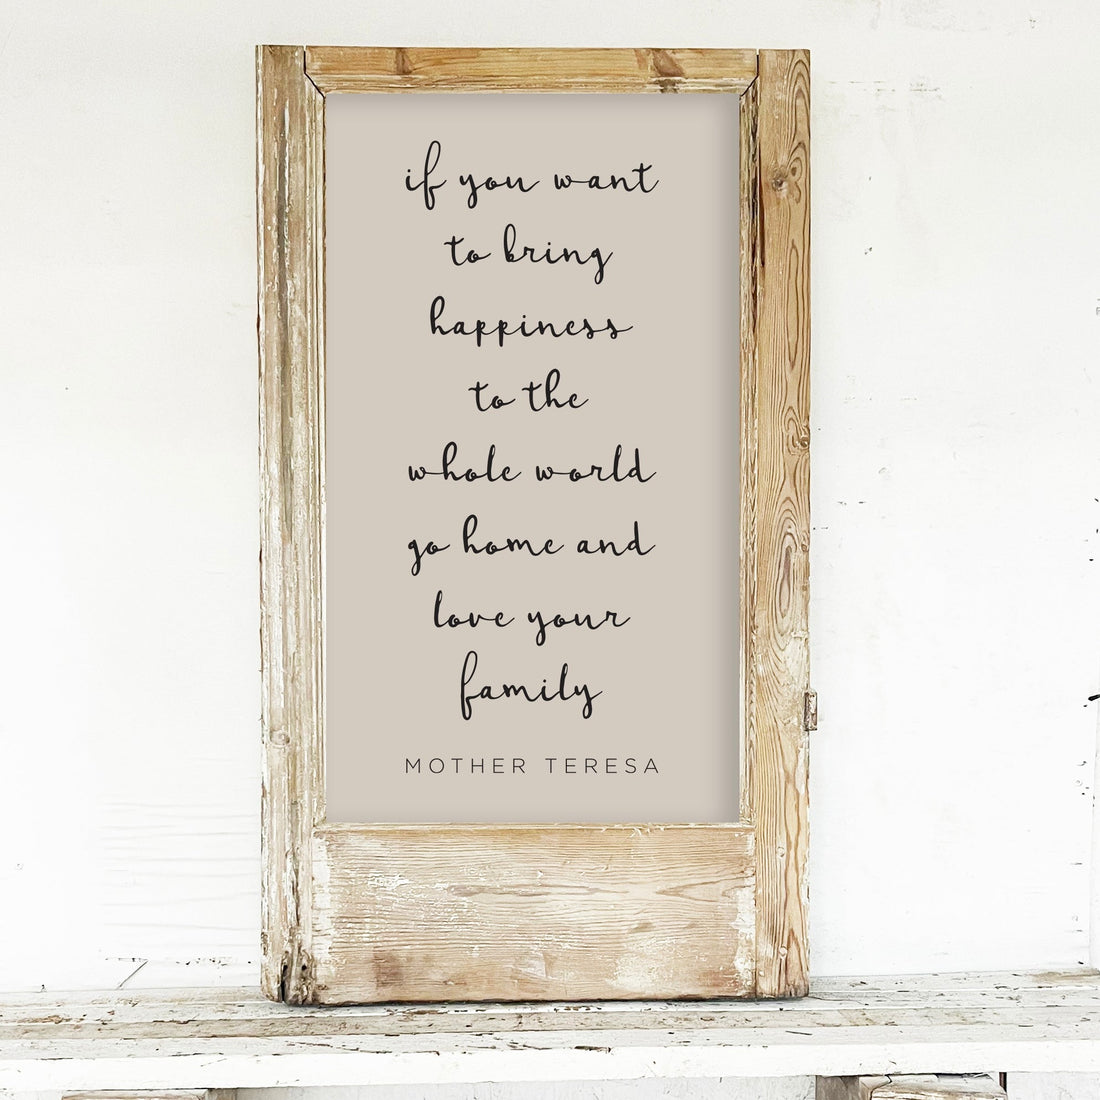 Mother Theresa Quote in European Door Base-Light Wood Sanded Wash